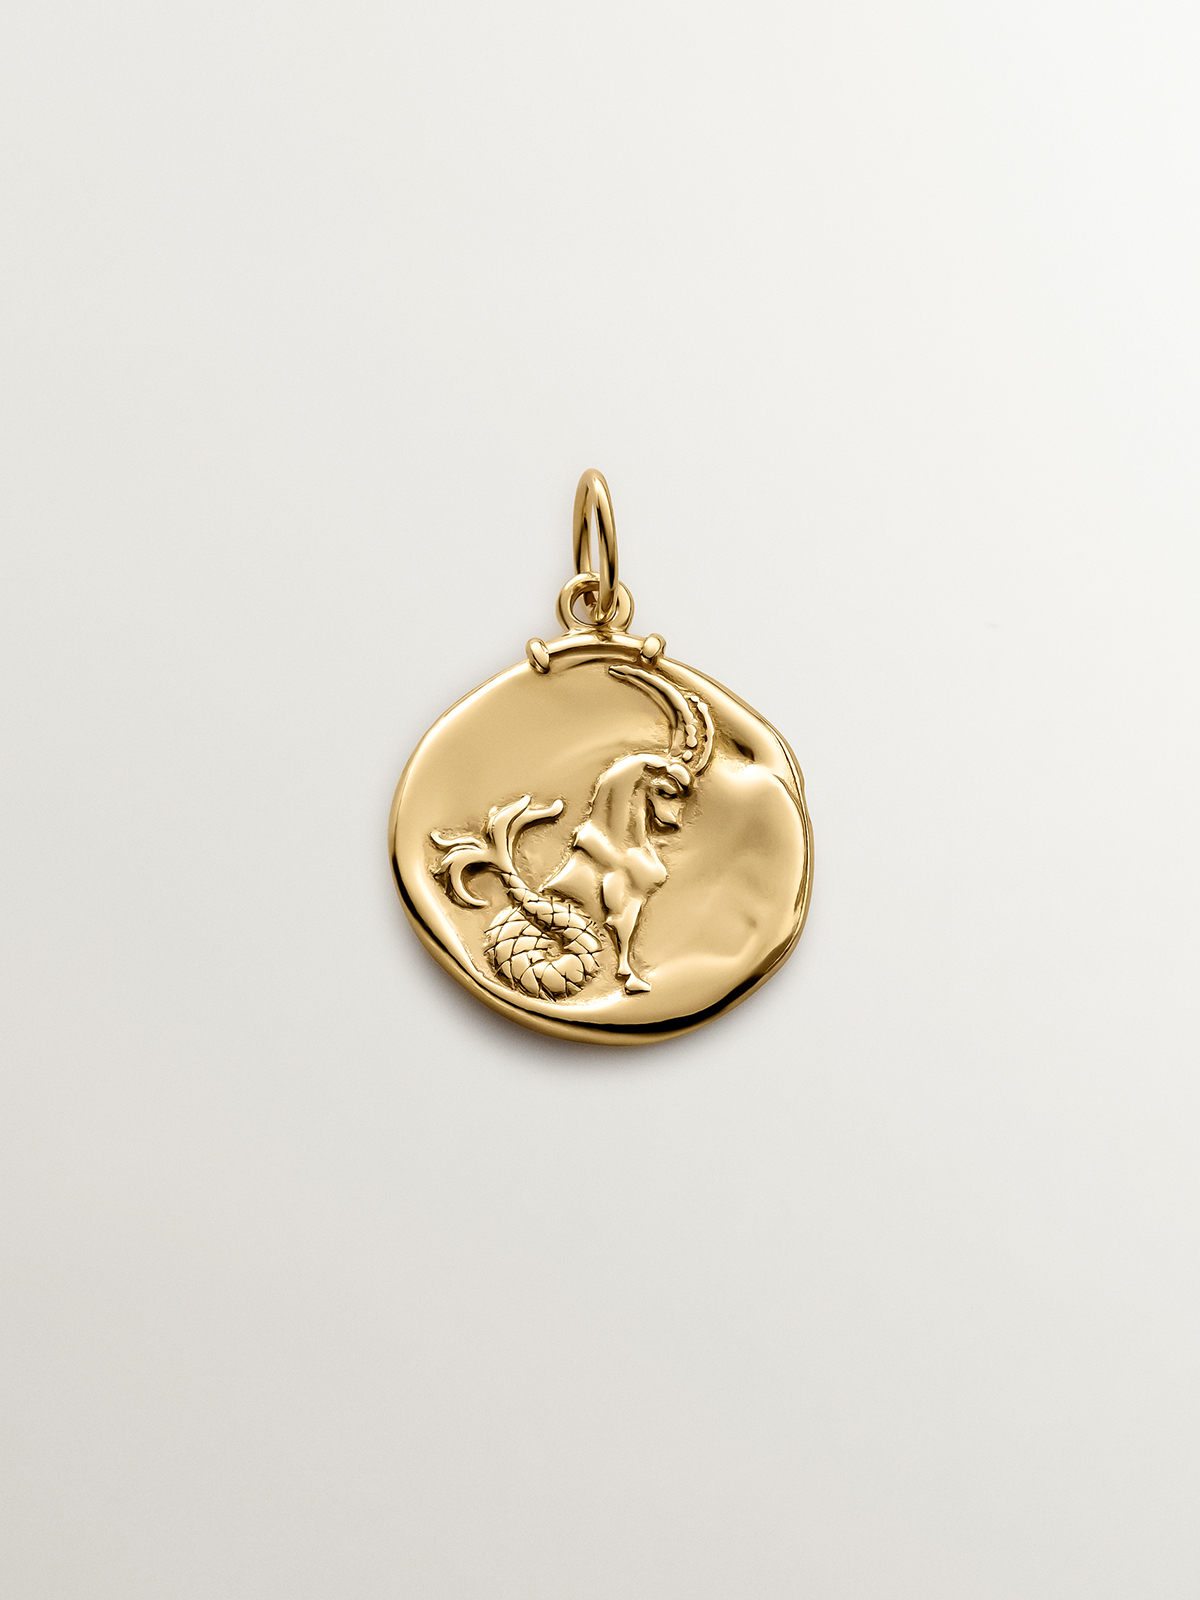 Capricorn Charm made of 925 silver, coated in 18K yellow gold